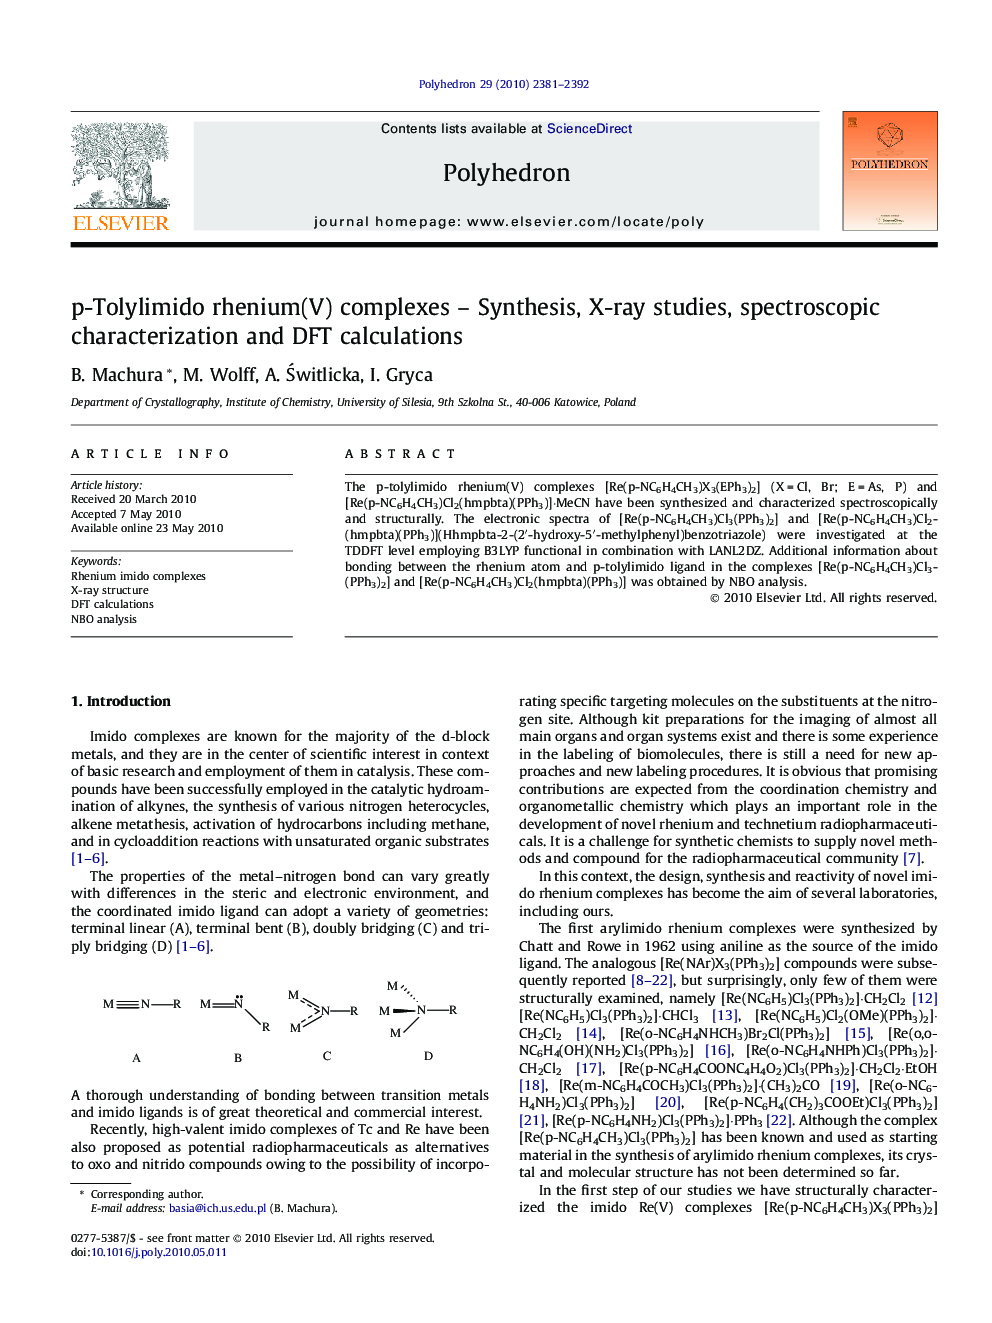 p-Tolylimido rhenium(V) complexes – Synthesis, X-ray studies, spectroscopic characterization and DFT calculations